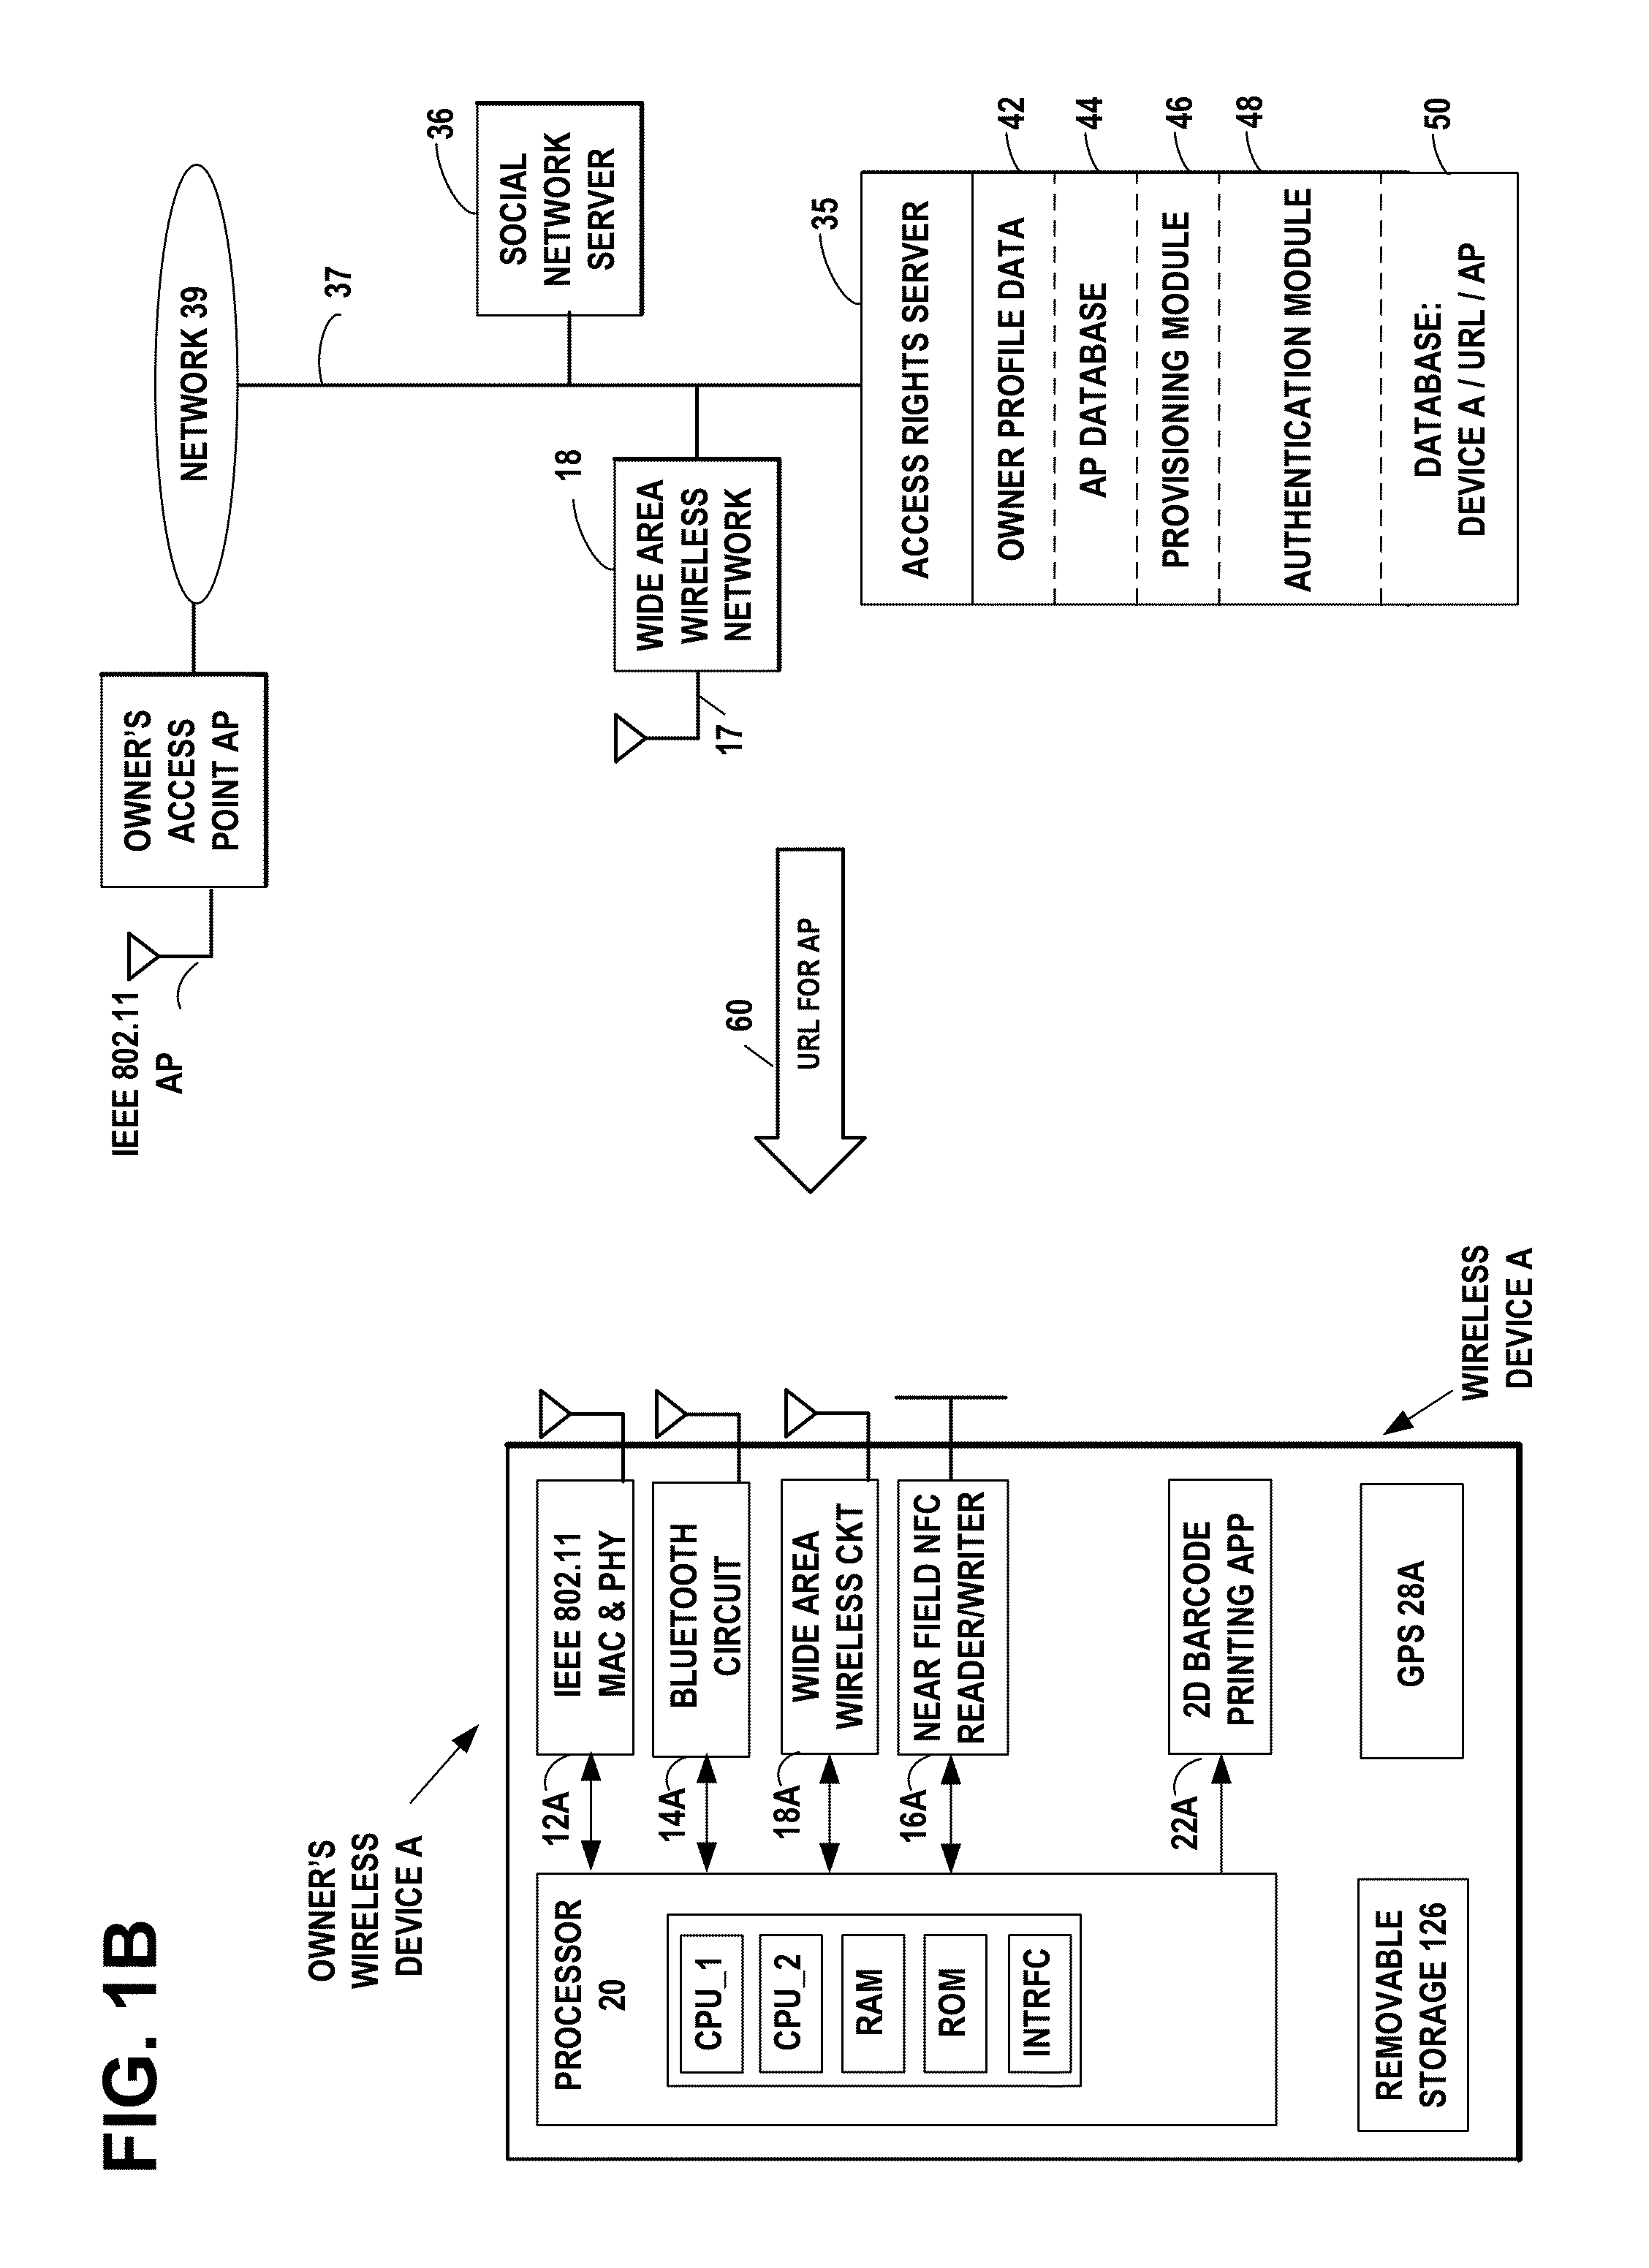 Method, apparatus, and computer program product for sharing wireless network configurations